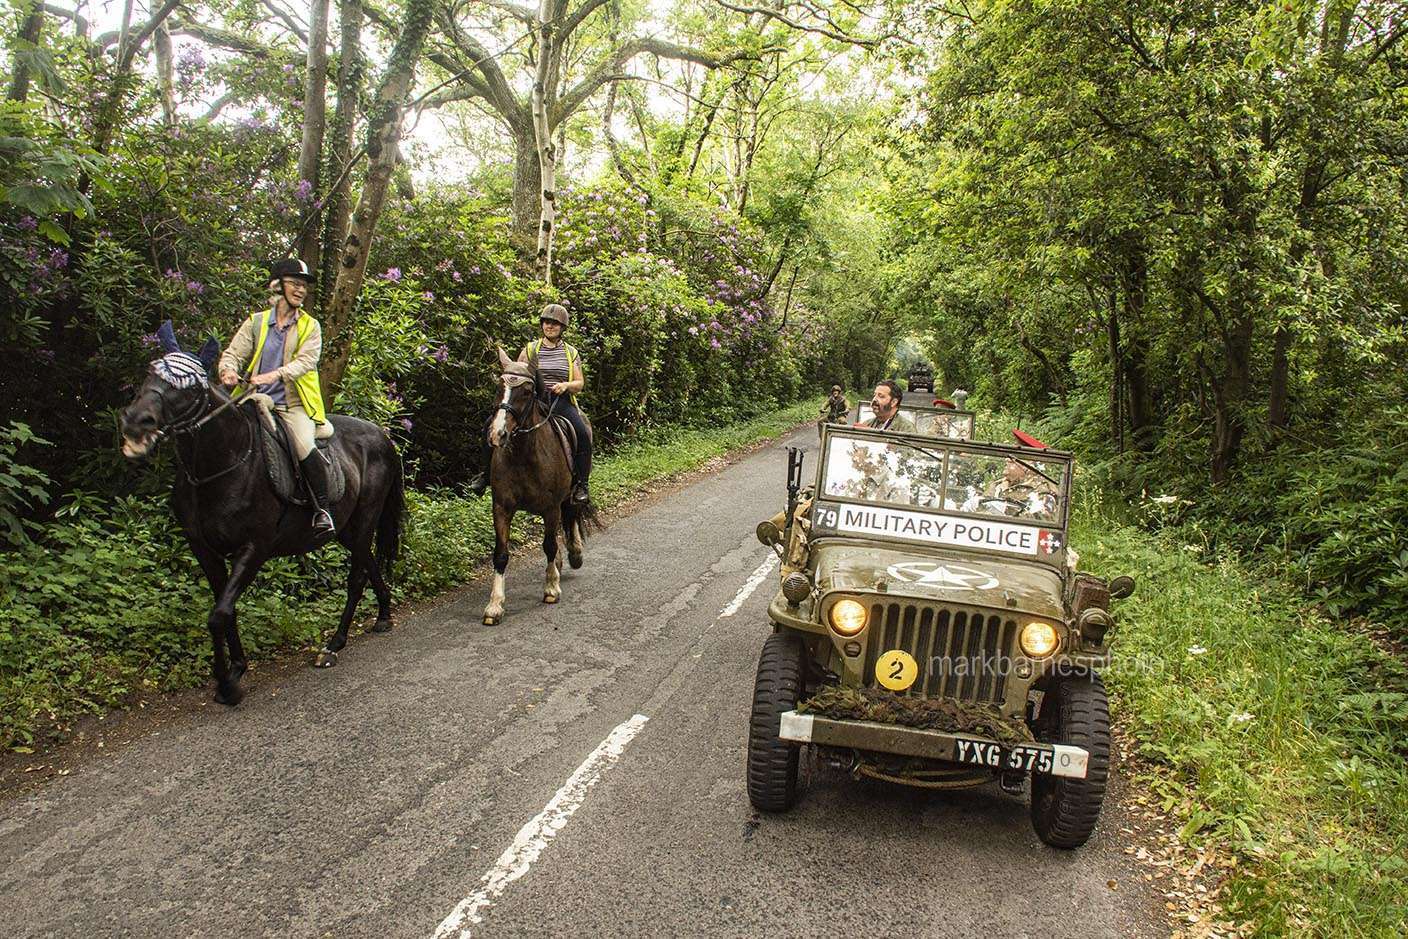 A Jeep carefully passing horse riders.